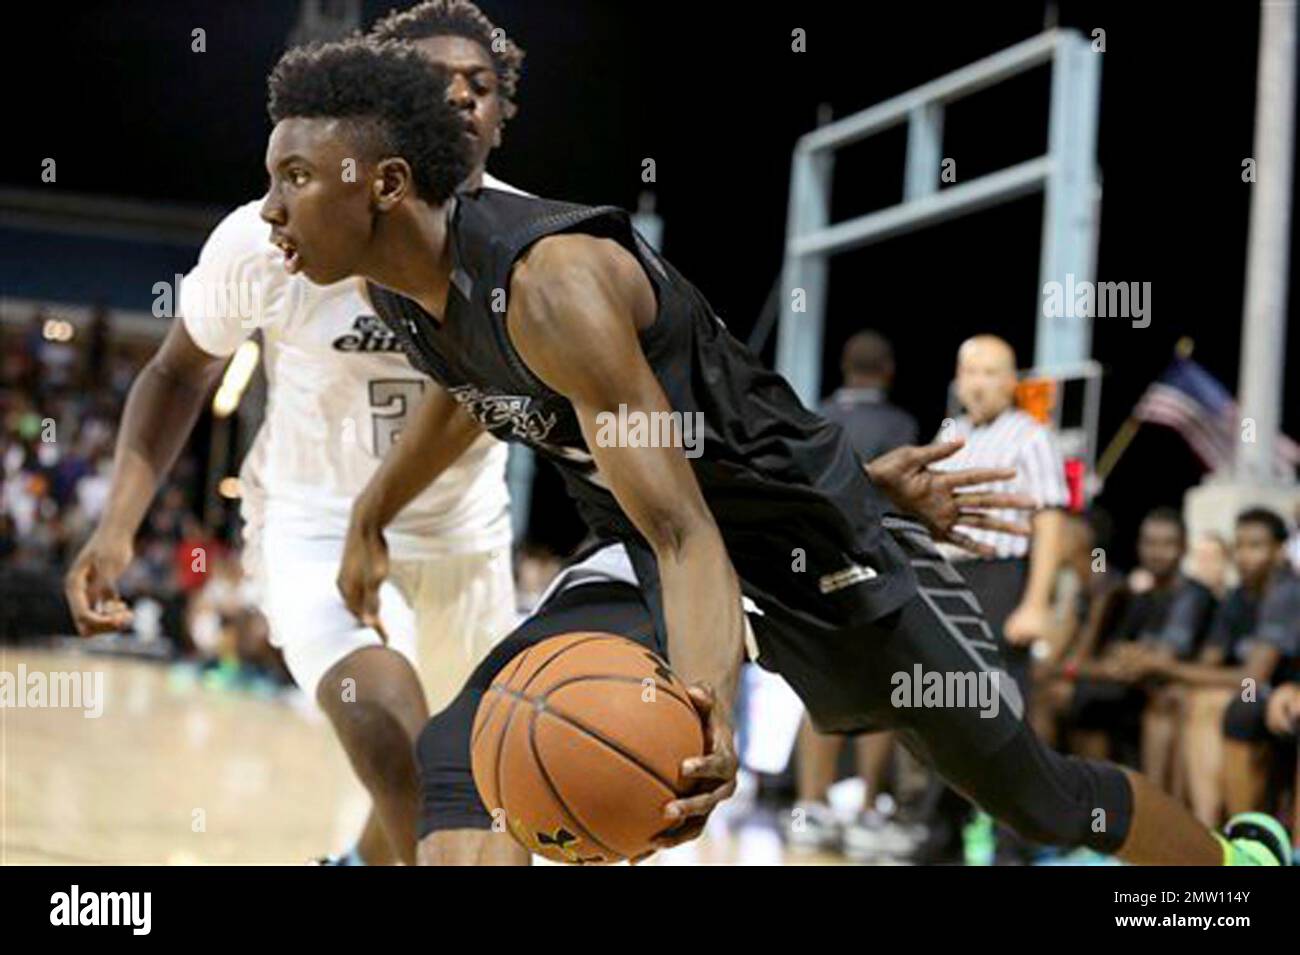 FILE - In this Aug. 20, 2016, file photo, Team Drive''s Hamidou Diallo, of  Kentucky, moves the ball against Team Clutch in the Under Armour Elite 24  basketball game in New York.